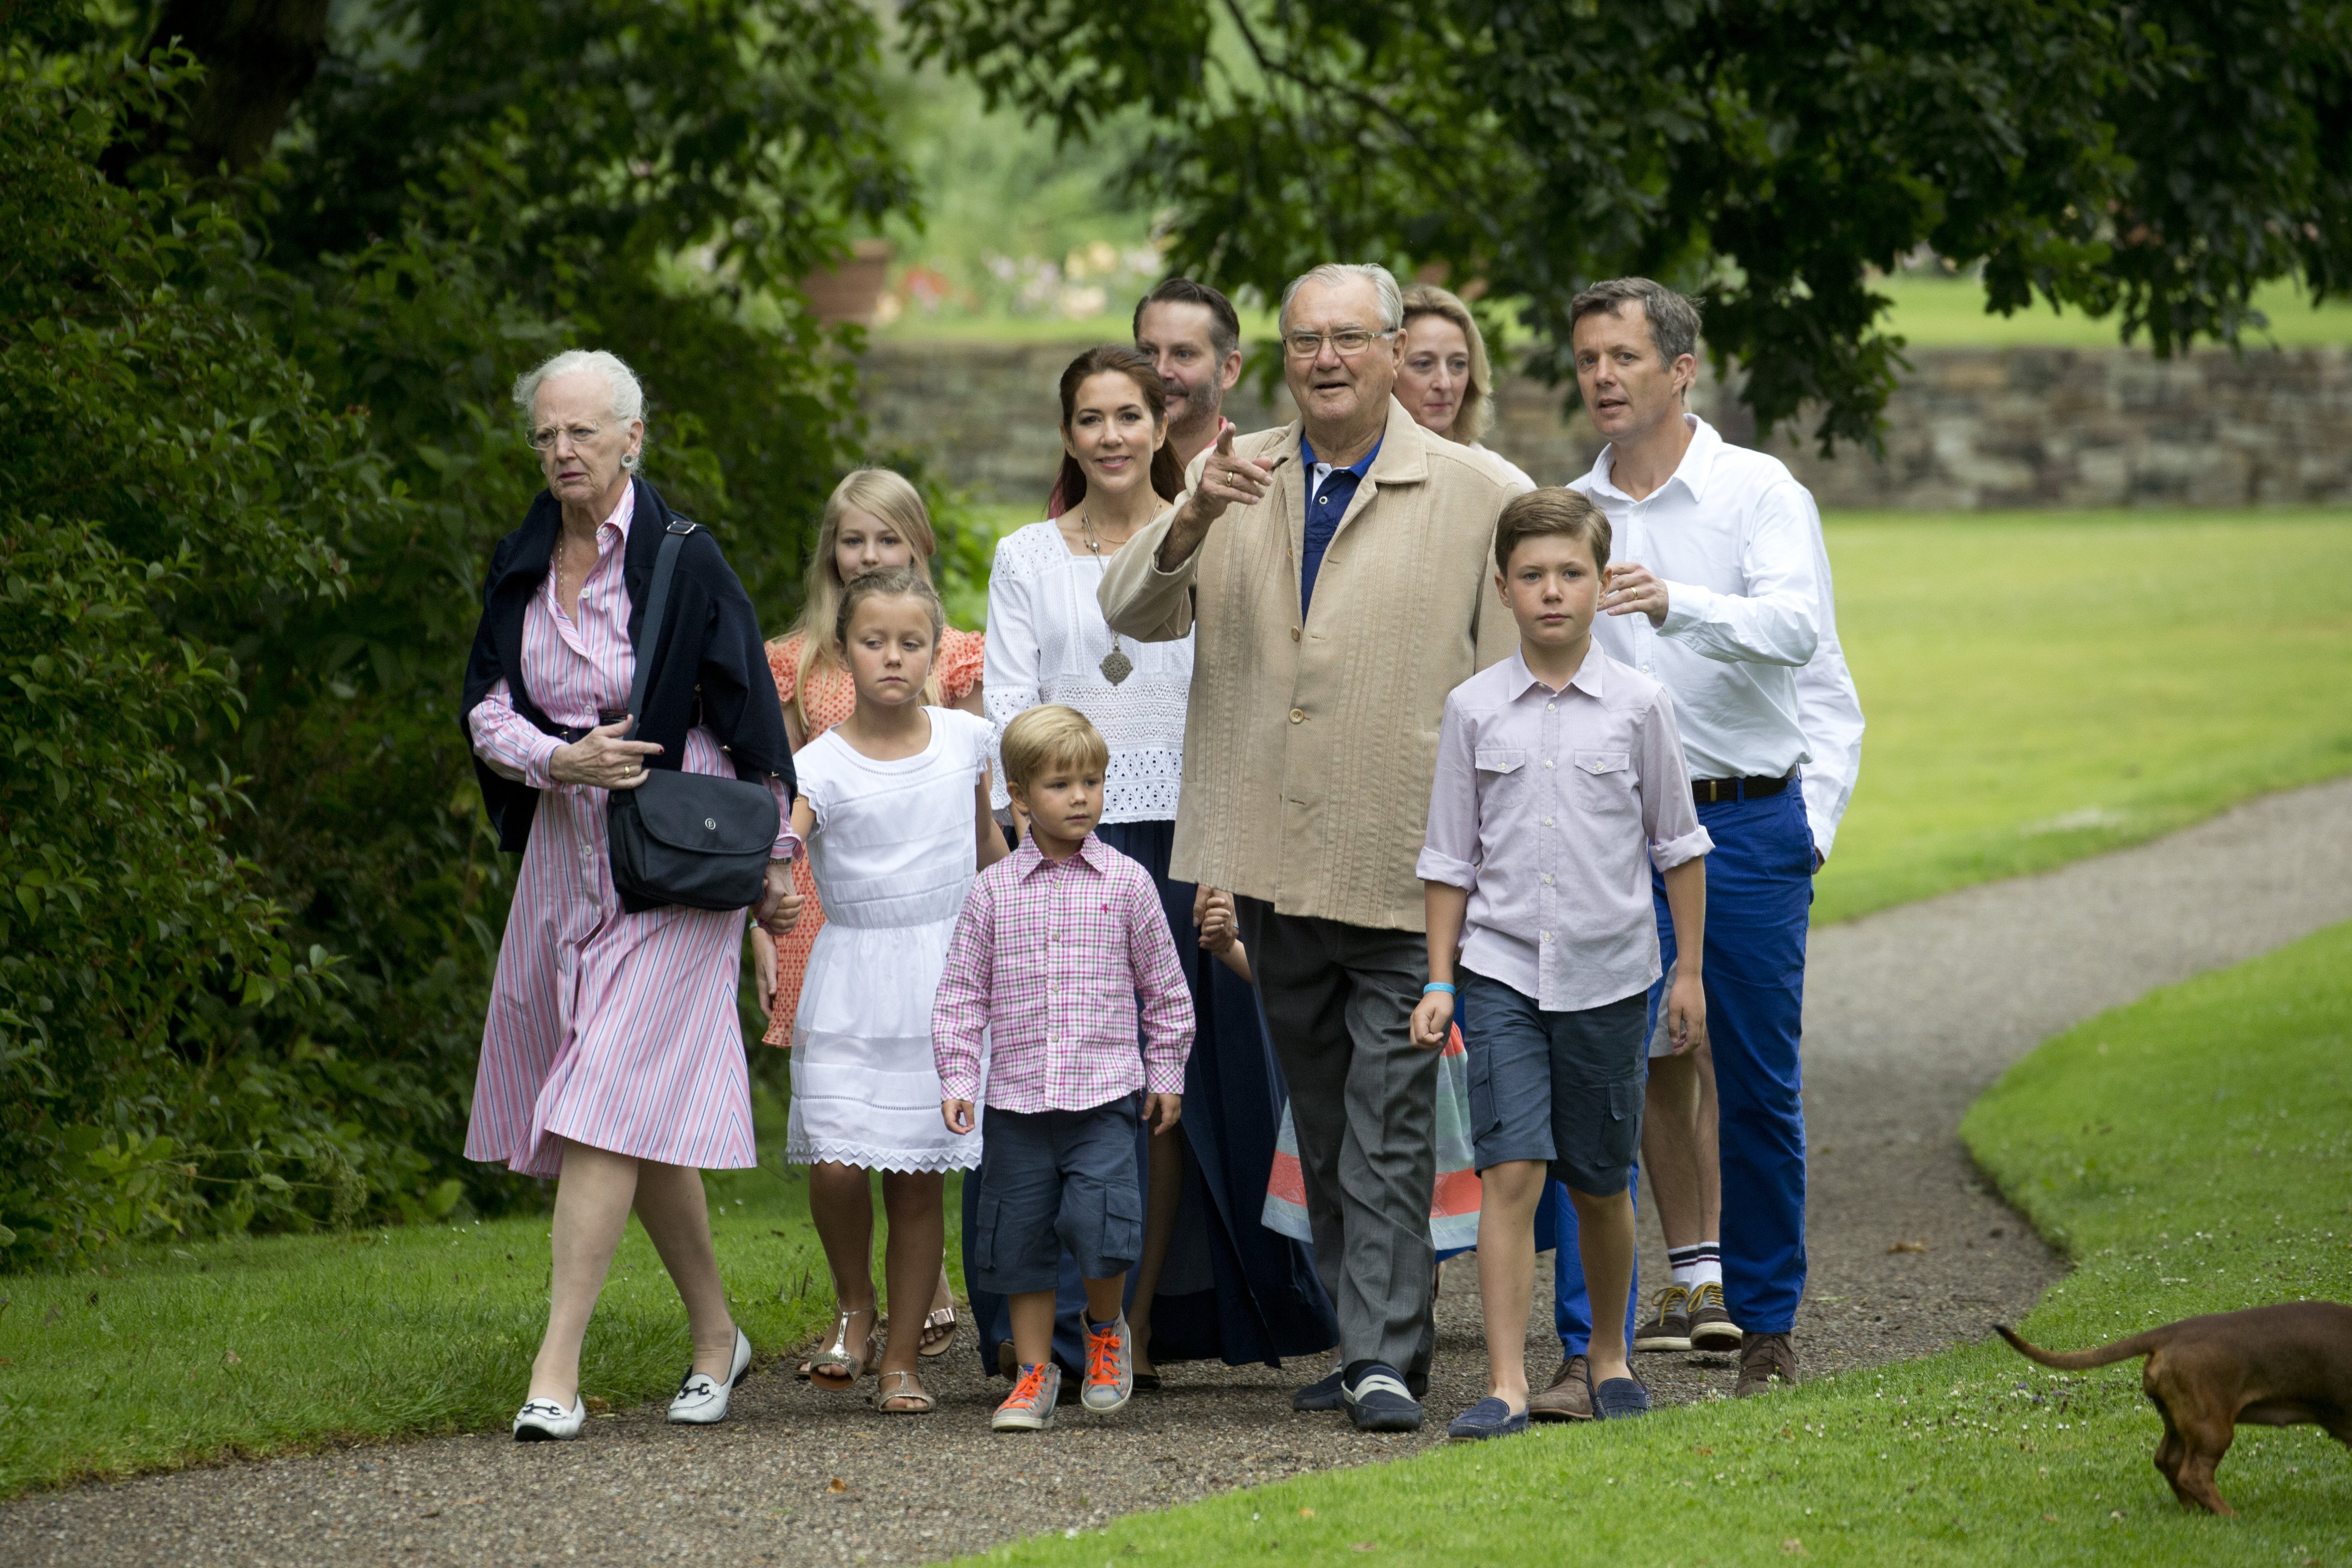 Queen Margrethe and Prince Henrik of Denmark, with grandchildren and members of The Danish Royal Family, attend the annual summer Photocall for The Danish Royal Family at Grasten Castle on July 25, 2015, in Grasten, Denmark. | Source: Getty Images